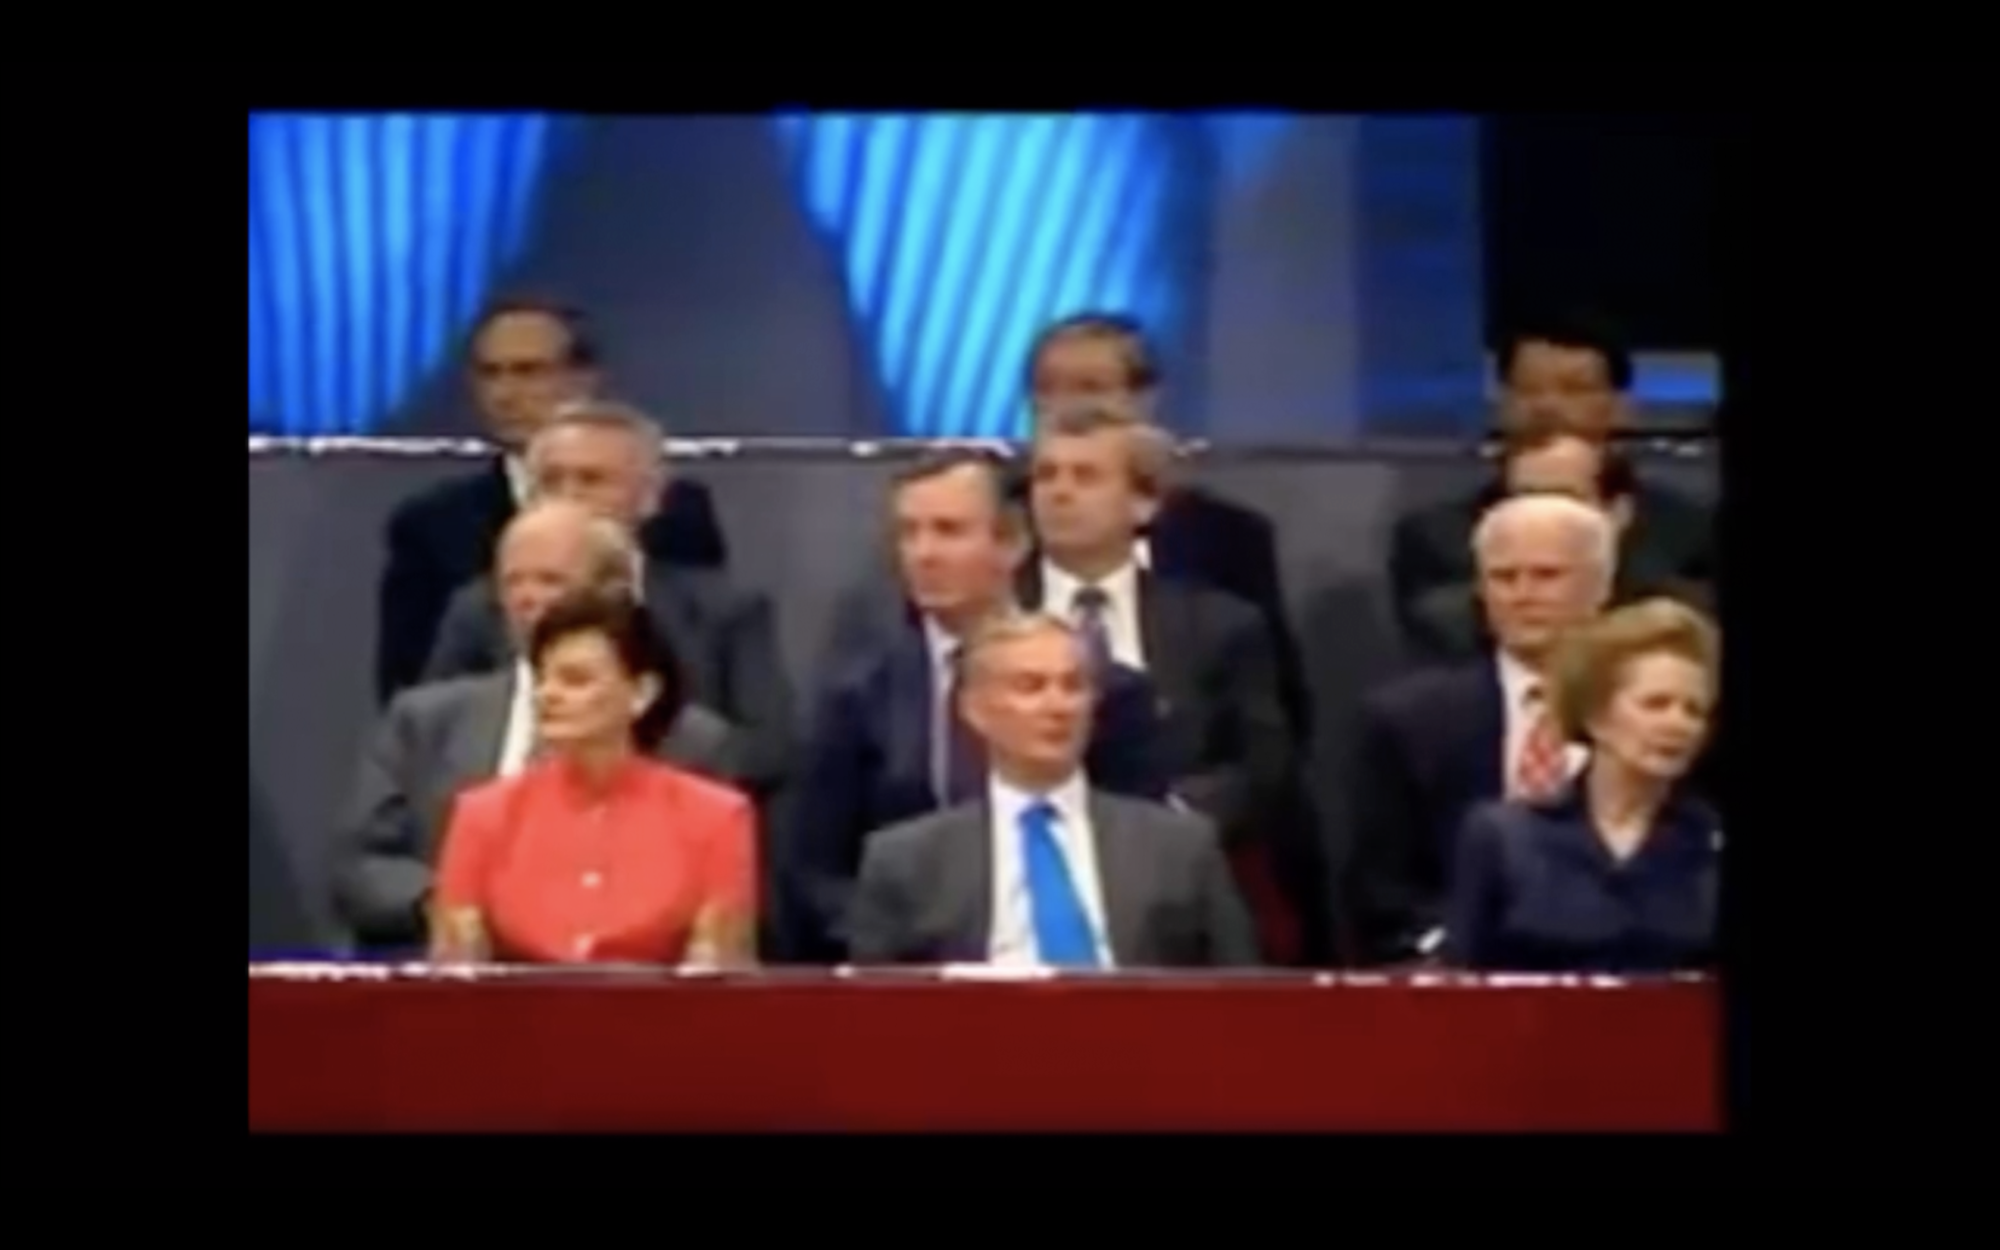 A grainy video still captured on Sia's phone of with various politicans sitting in three rows. In the front right hand side appears Margaret Thatcher